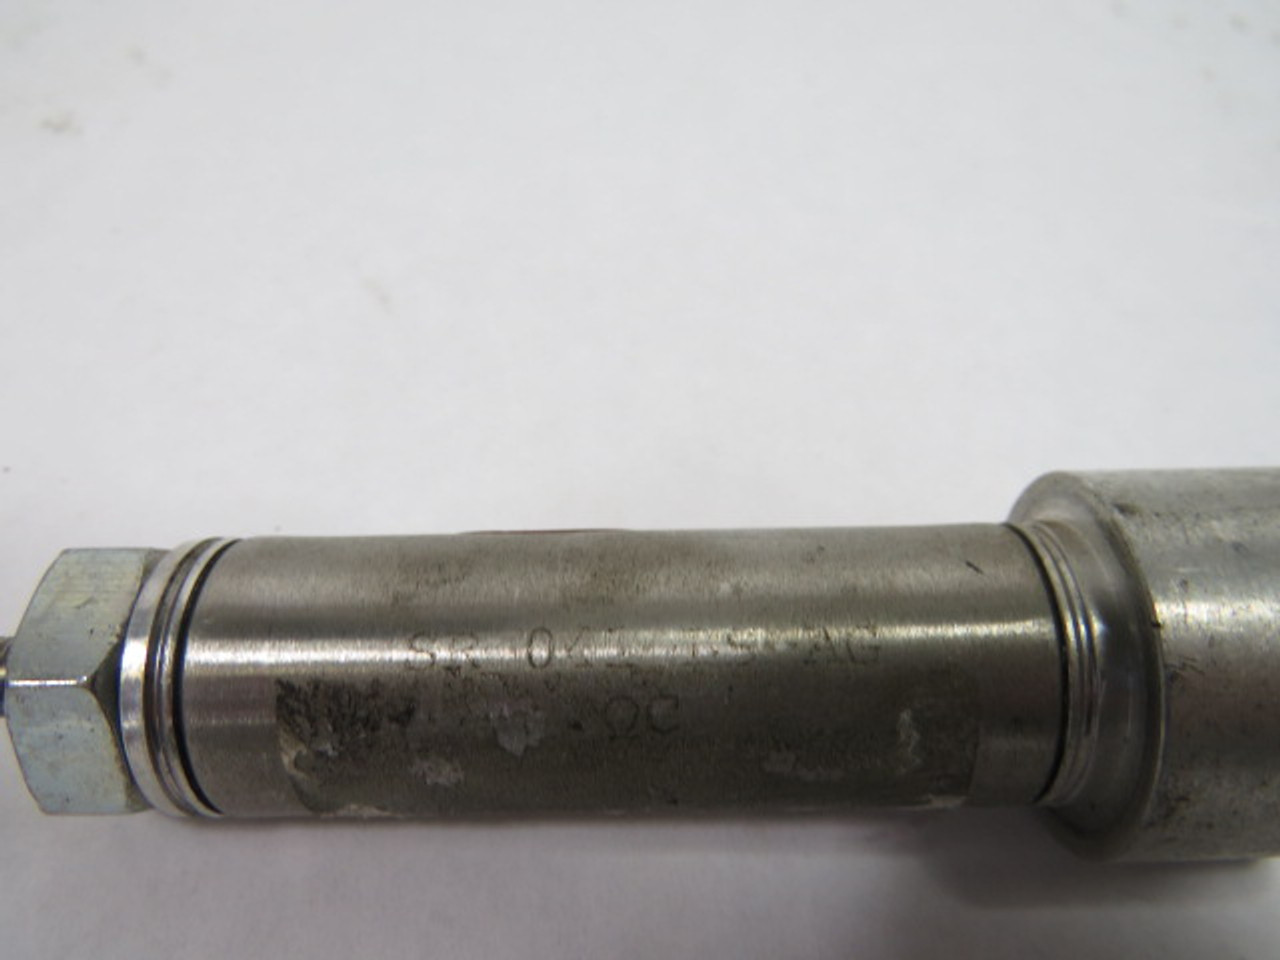 Bimba SR-041-IS-AG Cylinder 1" Stroke 3/4" Bore USED